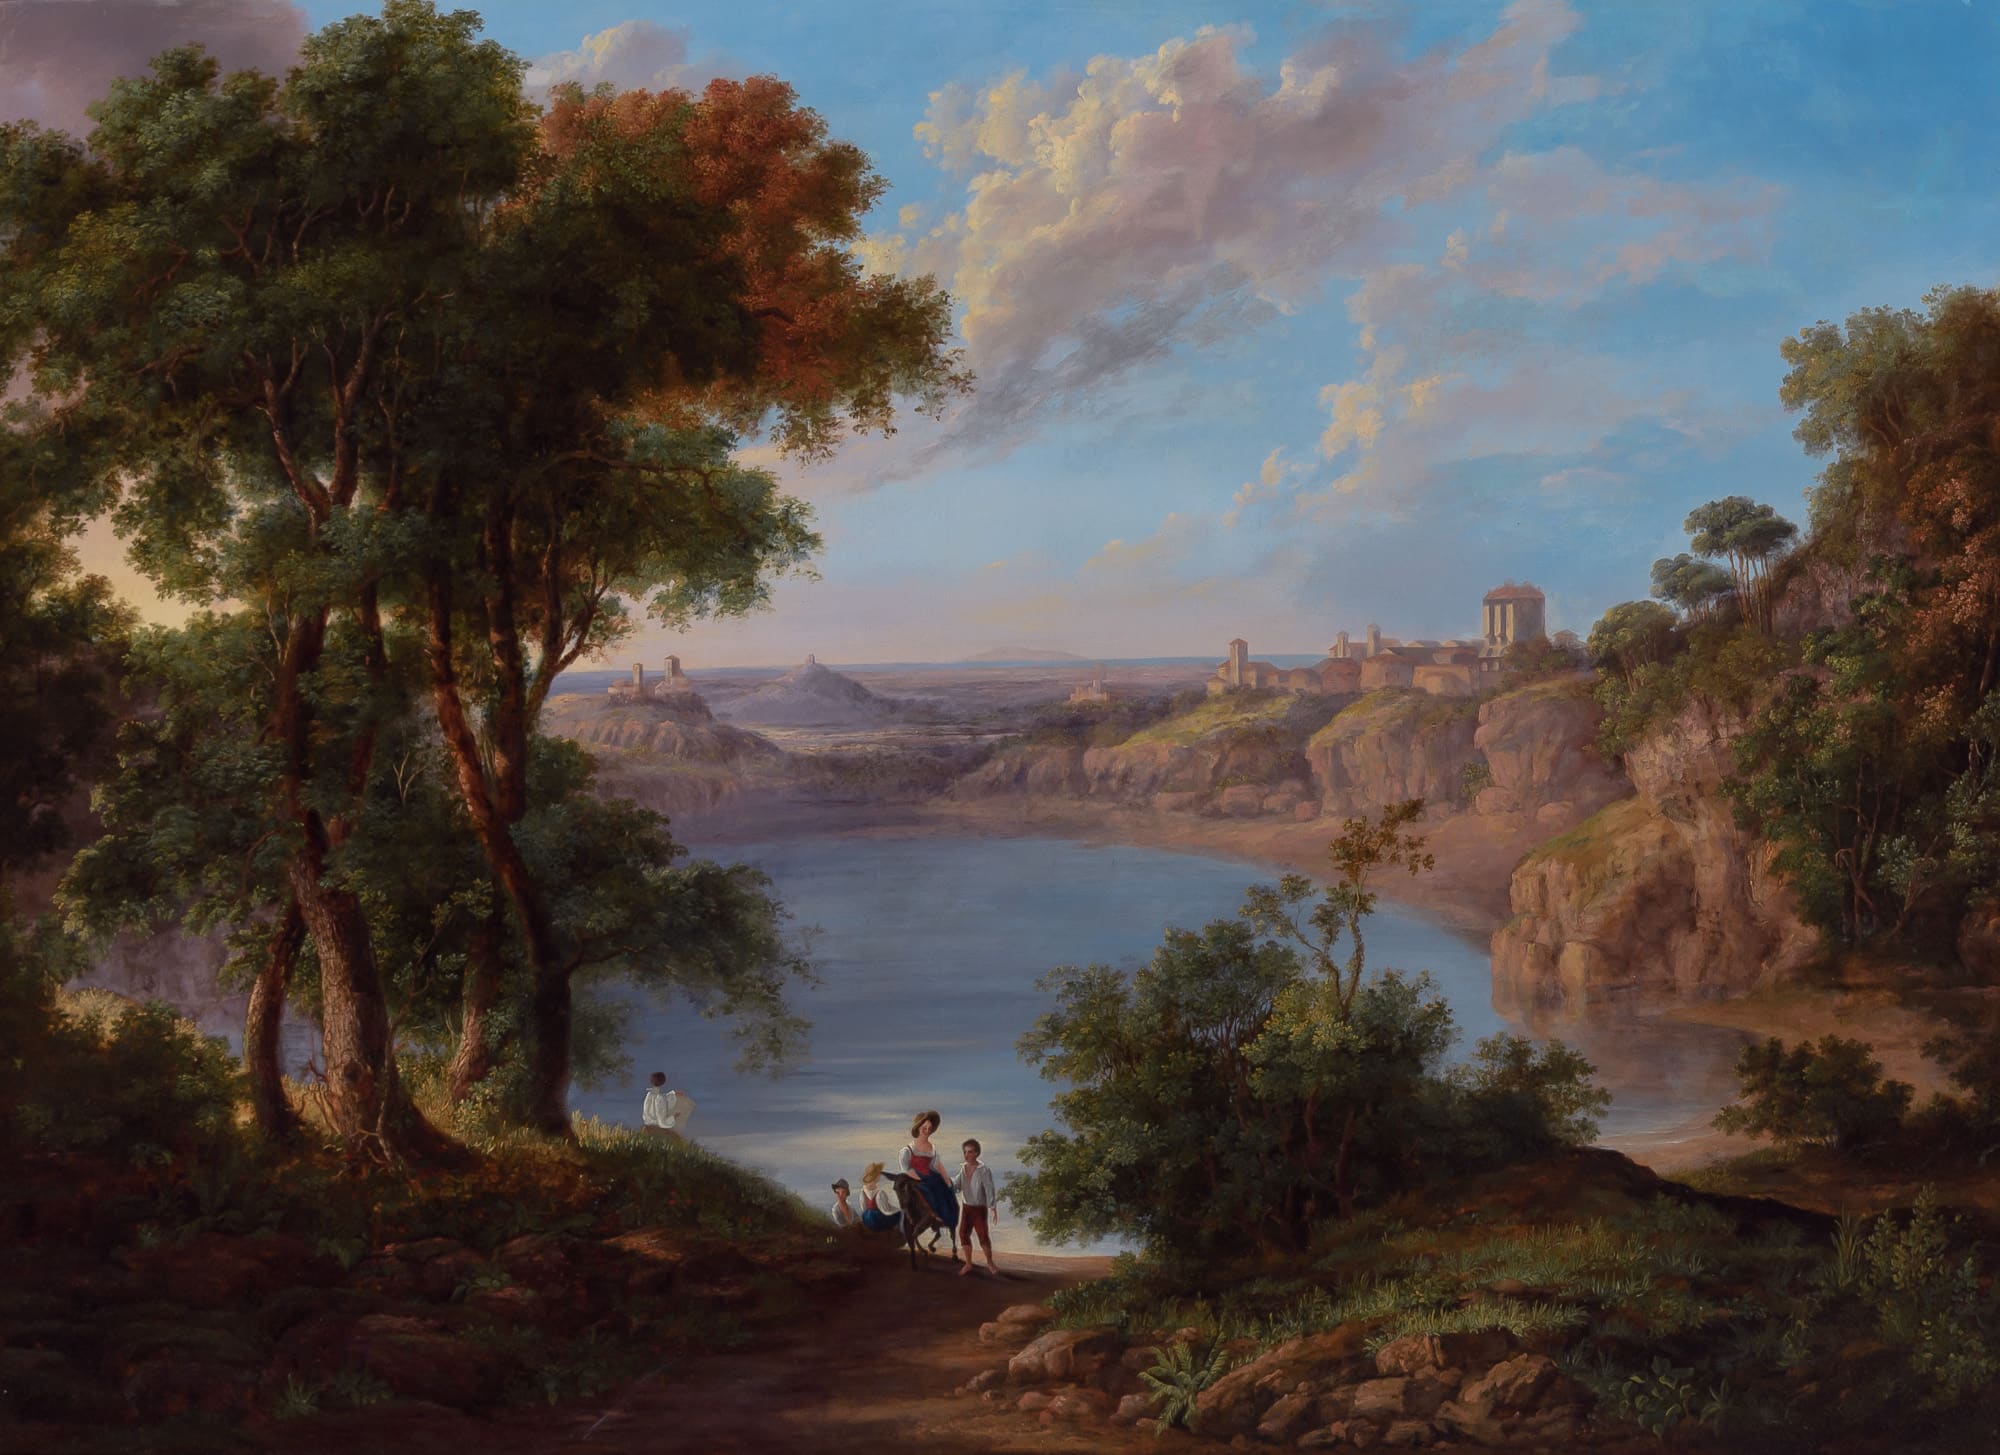 London Art Week - Nicolas-Didier Boguet (1755-1839), "A View Over Lake Nemi From The North," c.1783-1830, Oil on canvas, Nonesuch Gallery